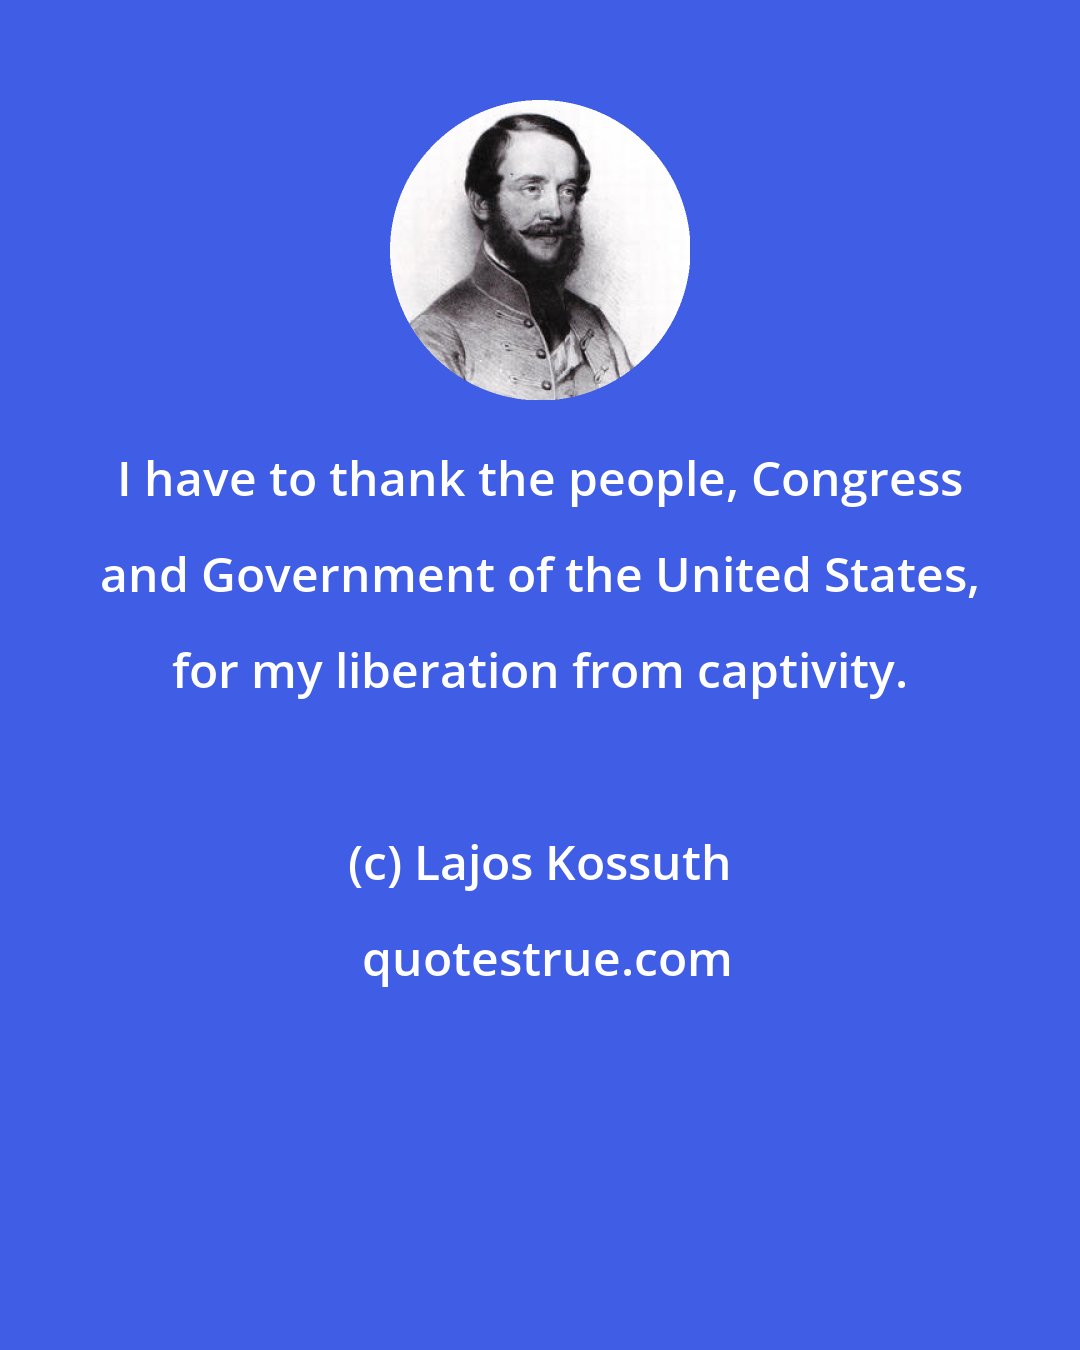 Lajos Kossuth: I have to thank the people, Congress and Government of the United States, for my liberation from captivity.